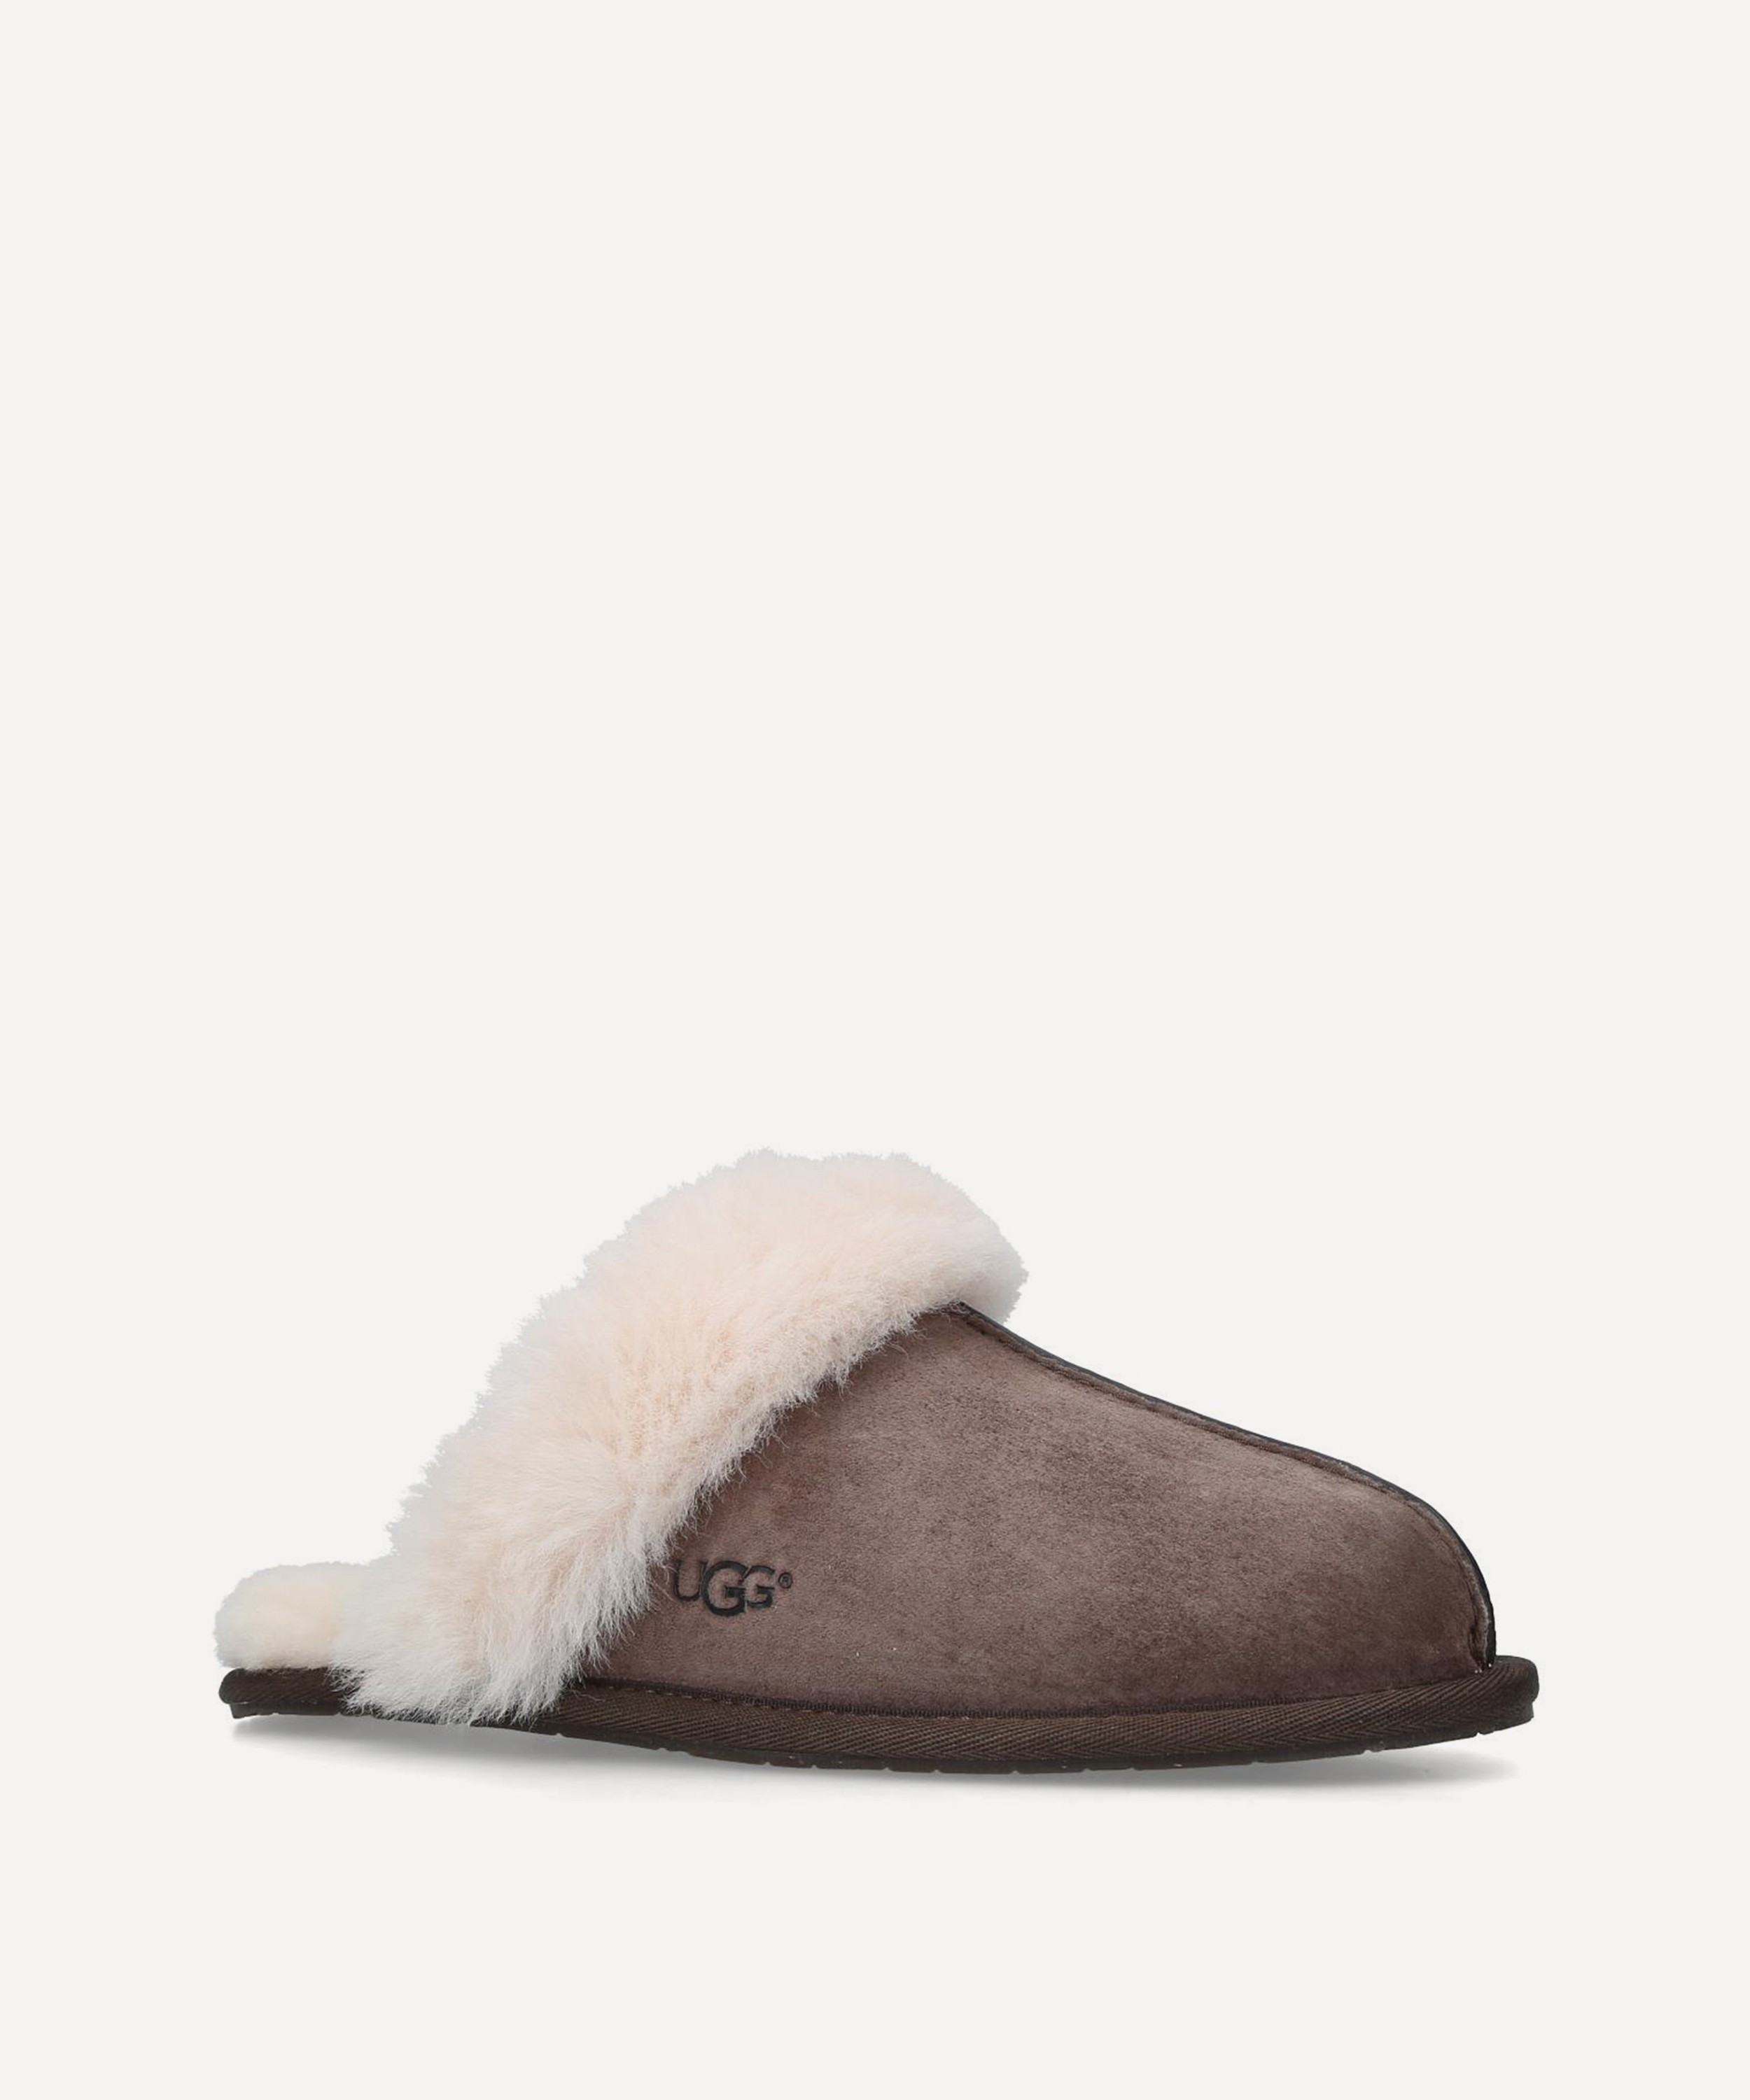 Ugg - Scuffette II Slippers image number 3